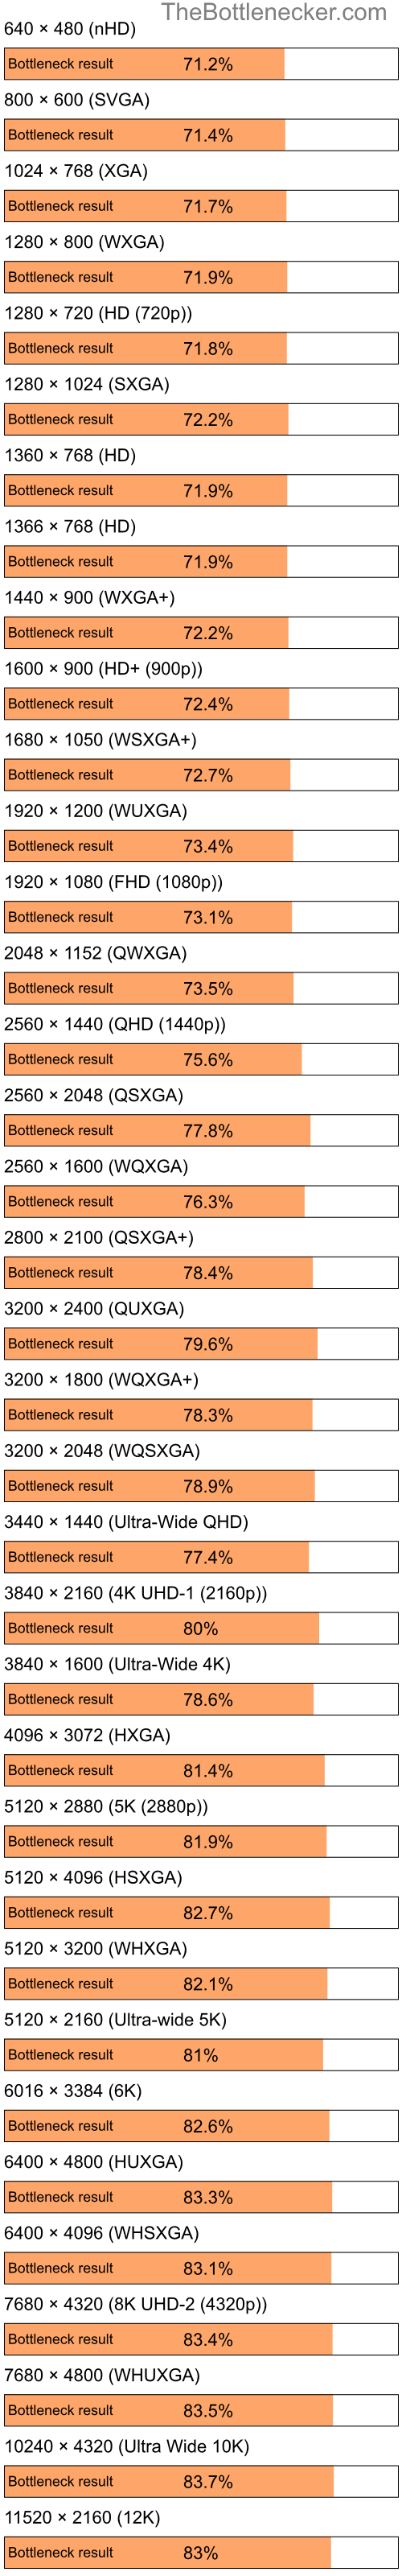 Bottleneck results by resolution for Intel Pentium 4 and NVIDIA GeForce 6150 LE in Processor Intense Tasks